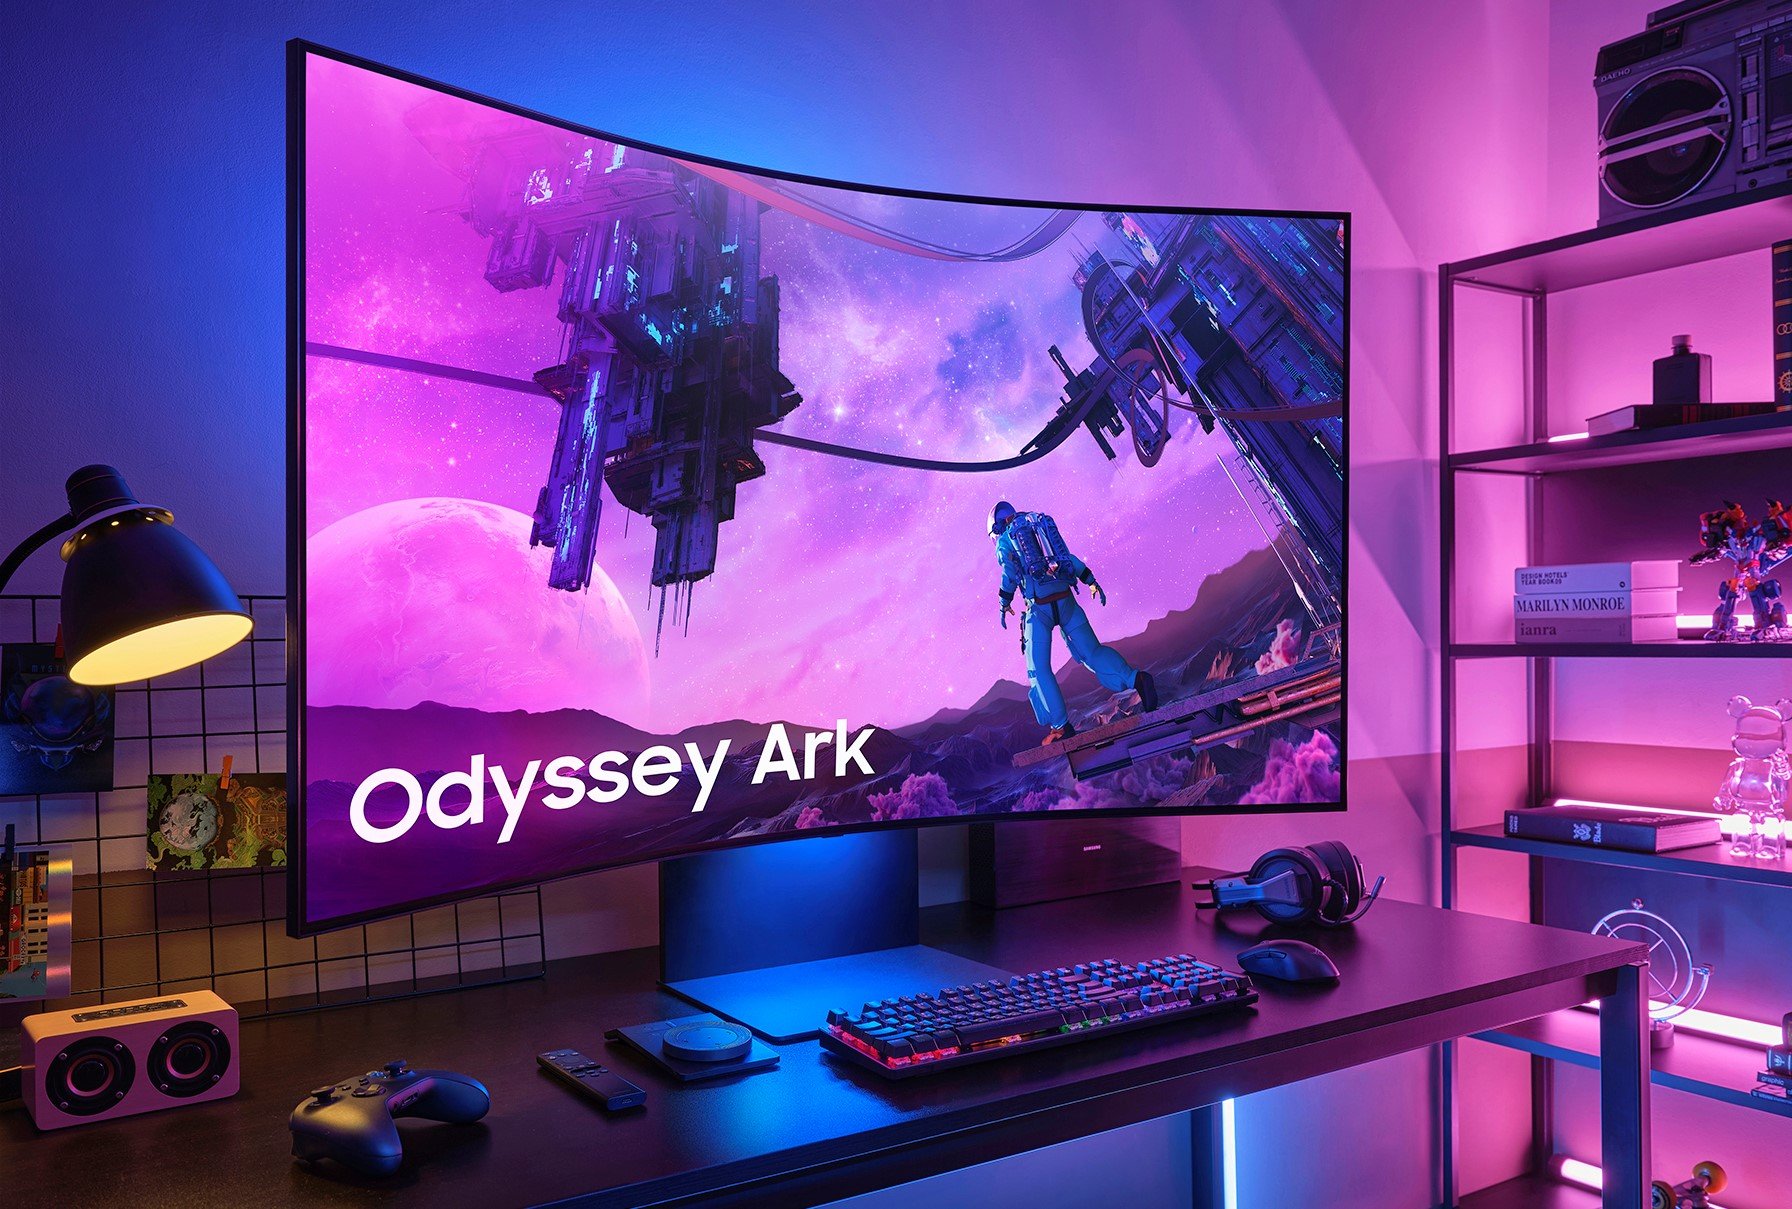 55-inch Samsung Odyssey Ark is enjoying a MASSIVE 40% discount RIGHT NOW! - Phandroid